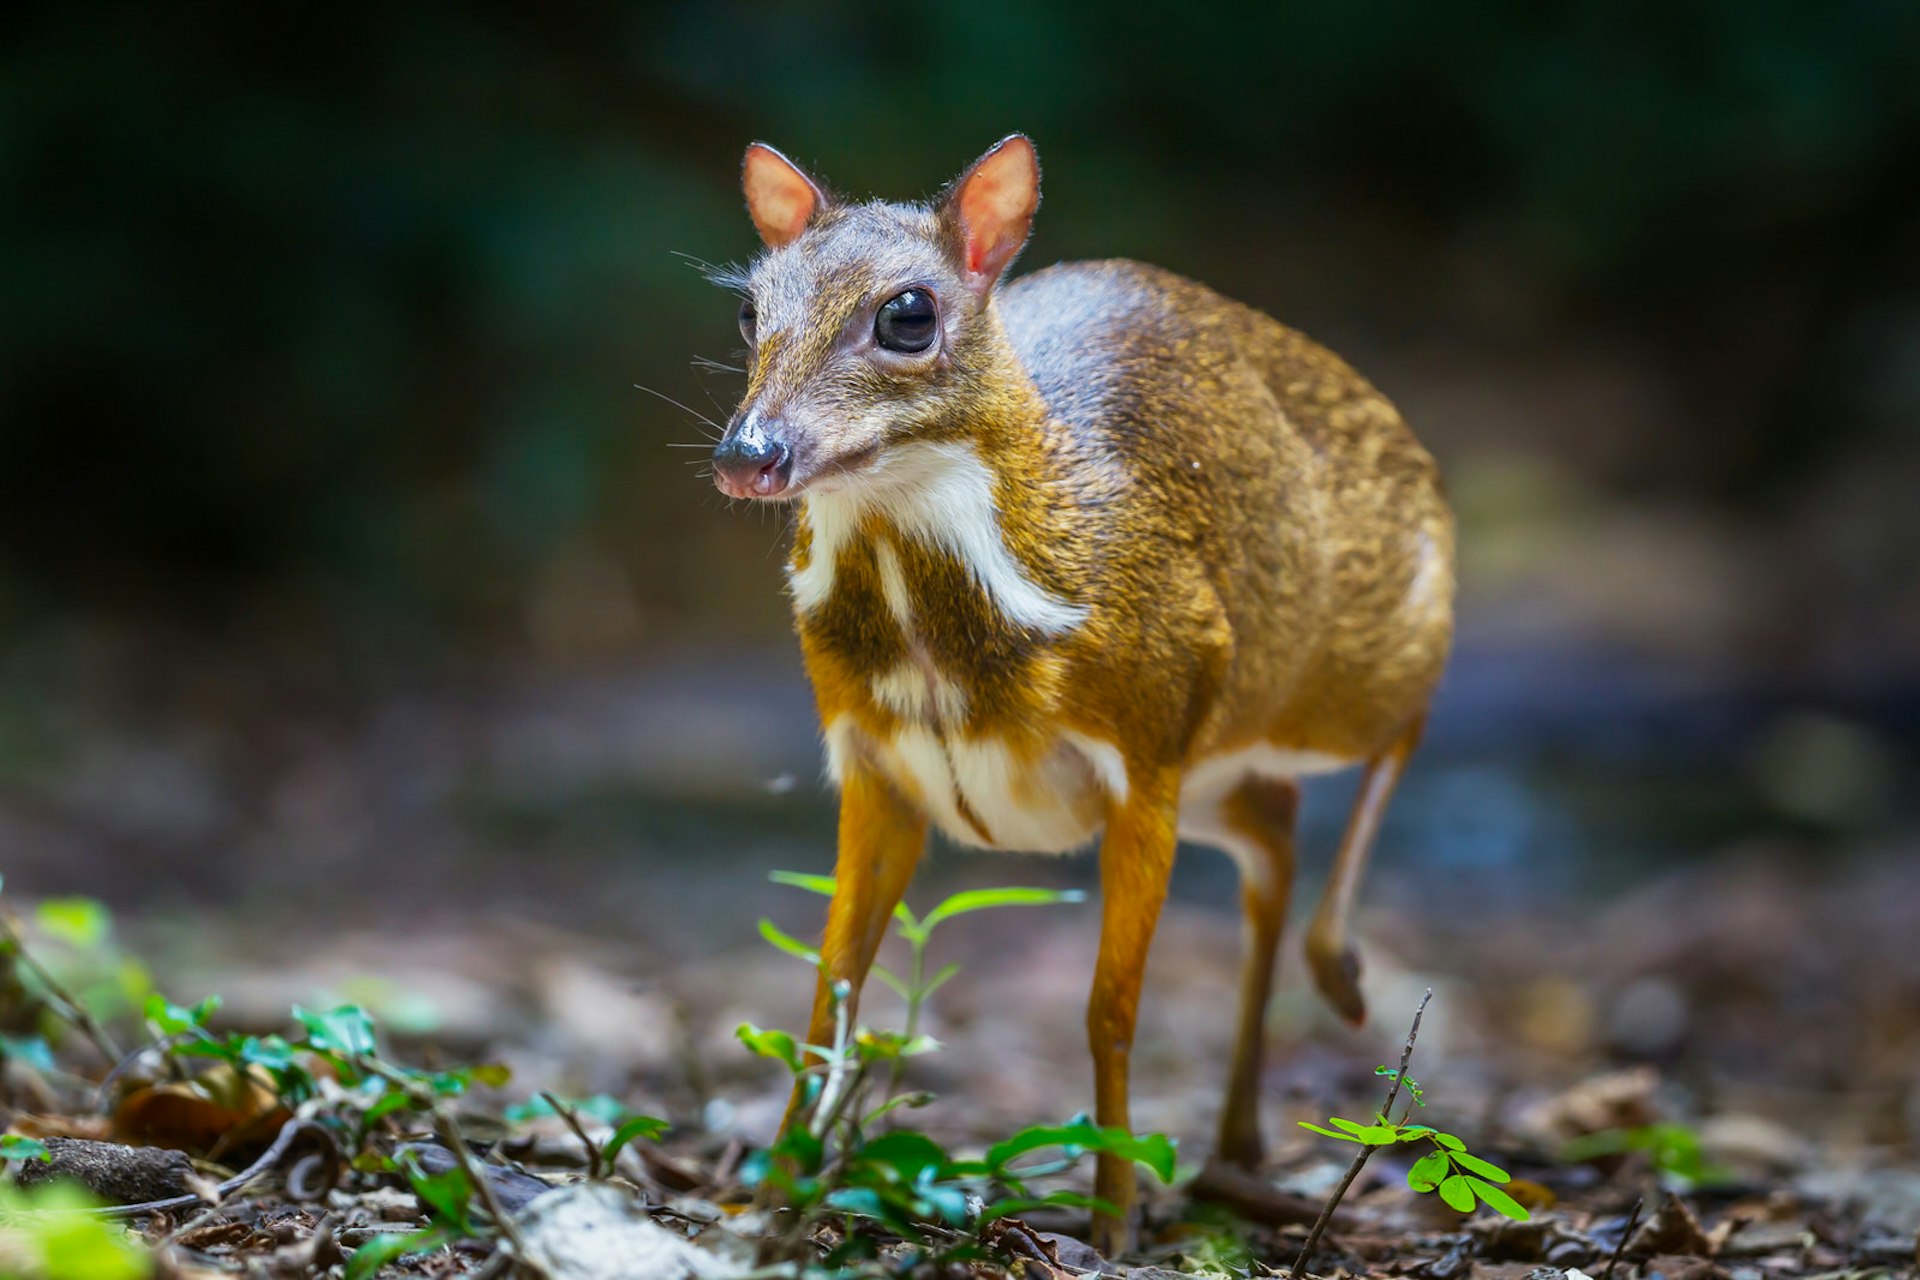 The mouse deer is a native of the jungles of Thailand © Kajornyot Wildlife Photography / Shutterstock